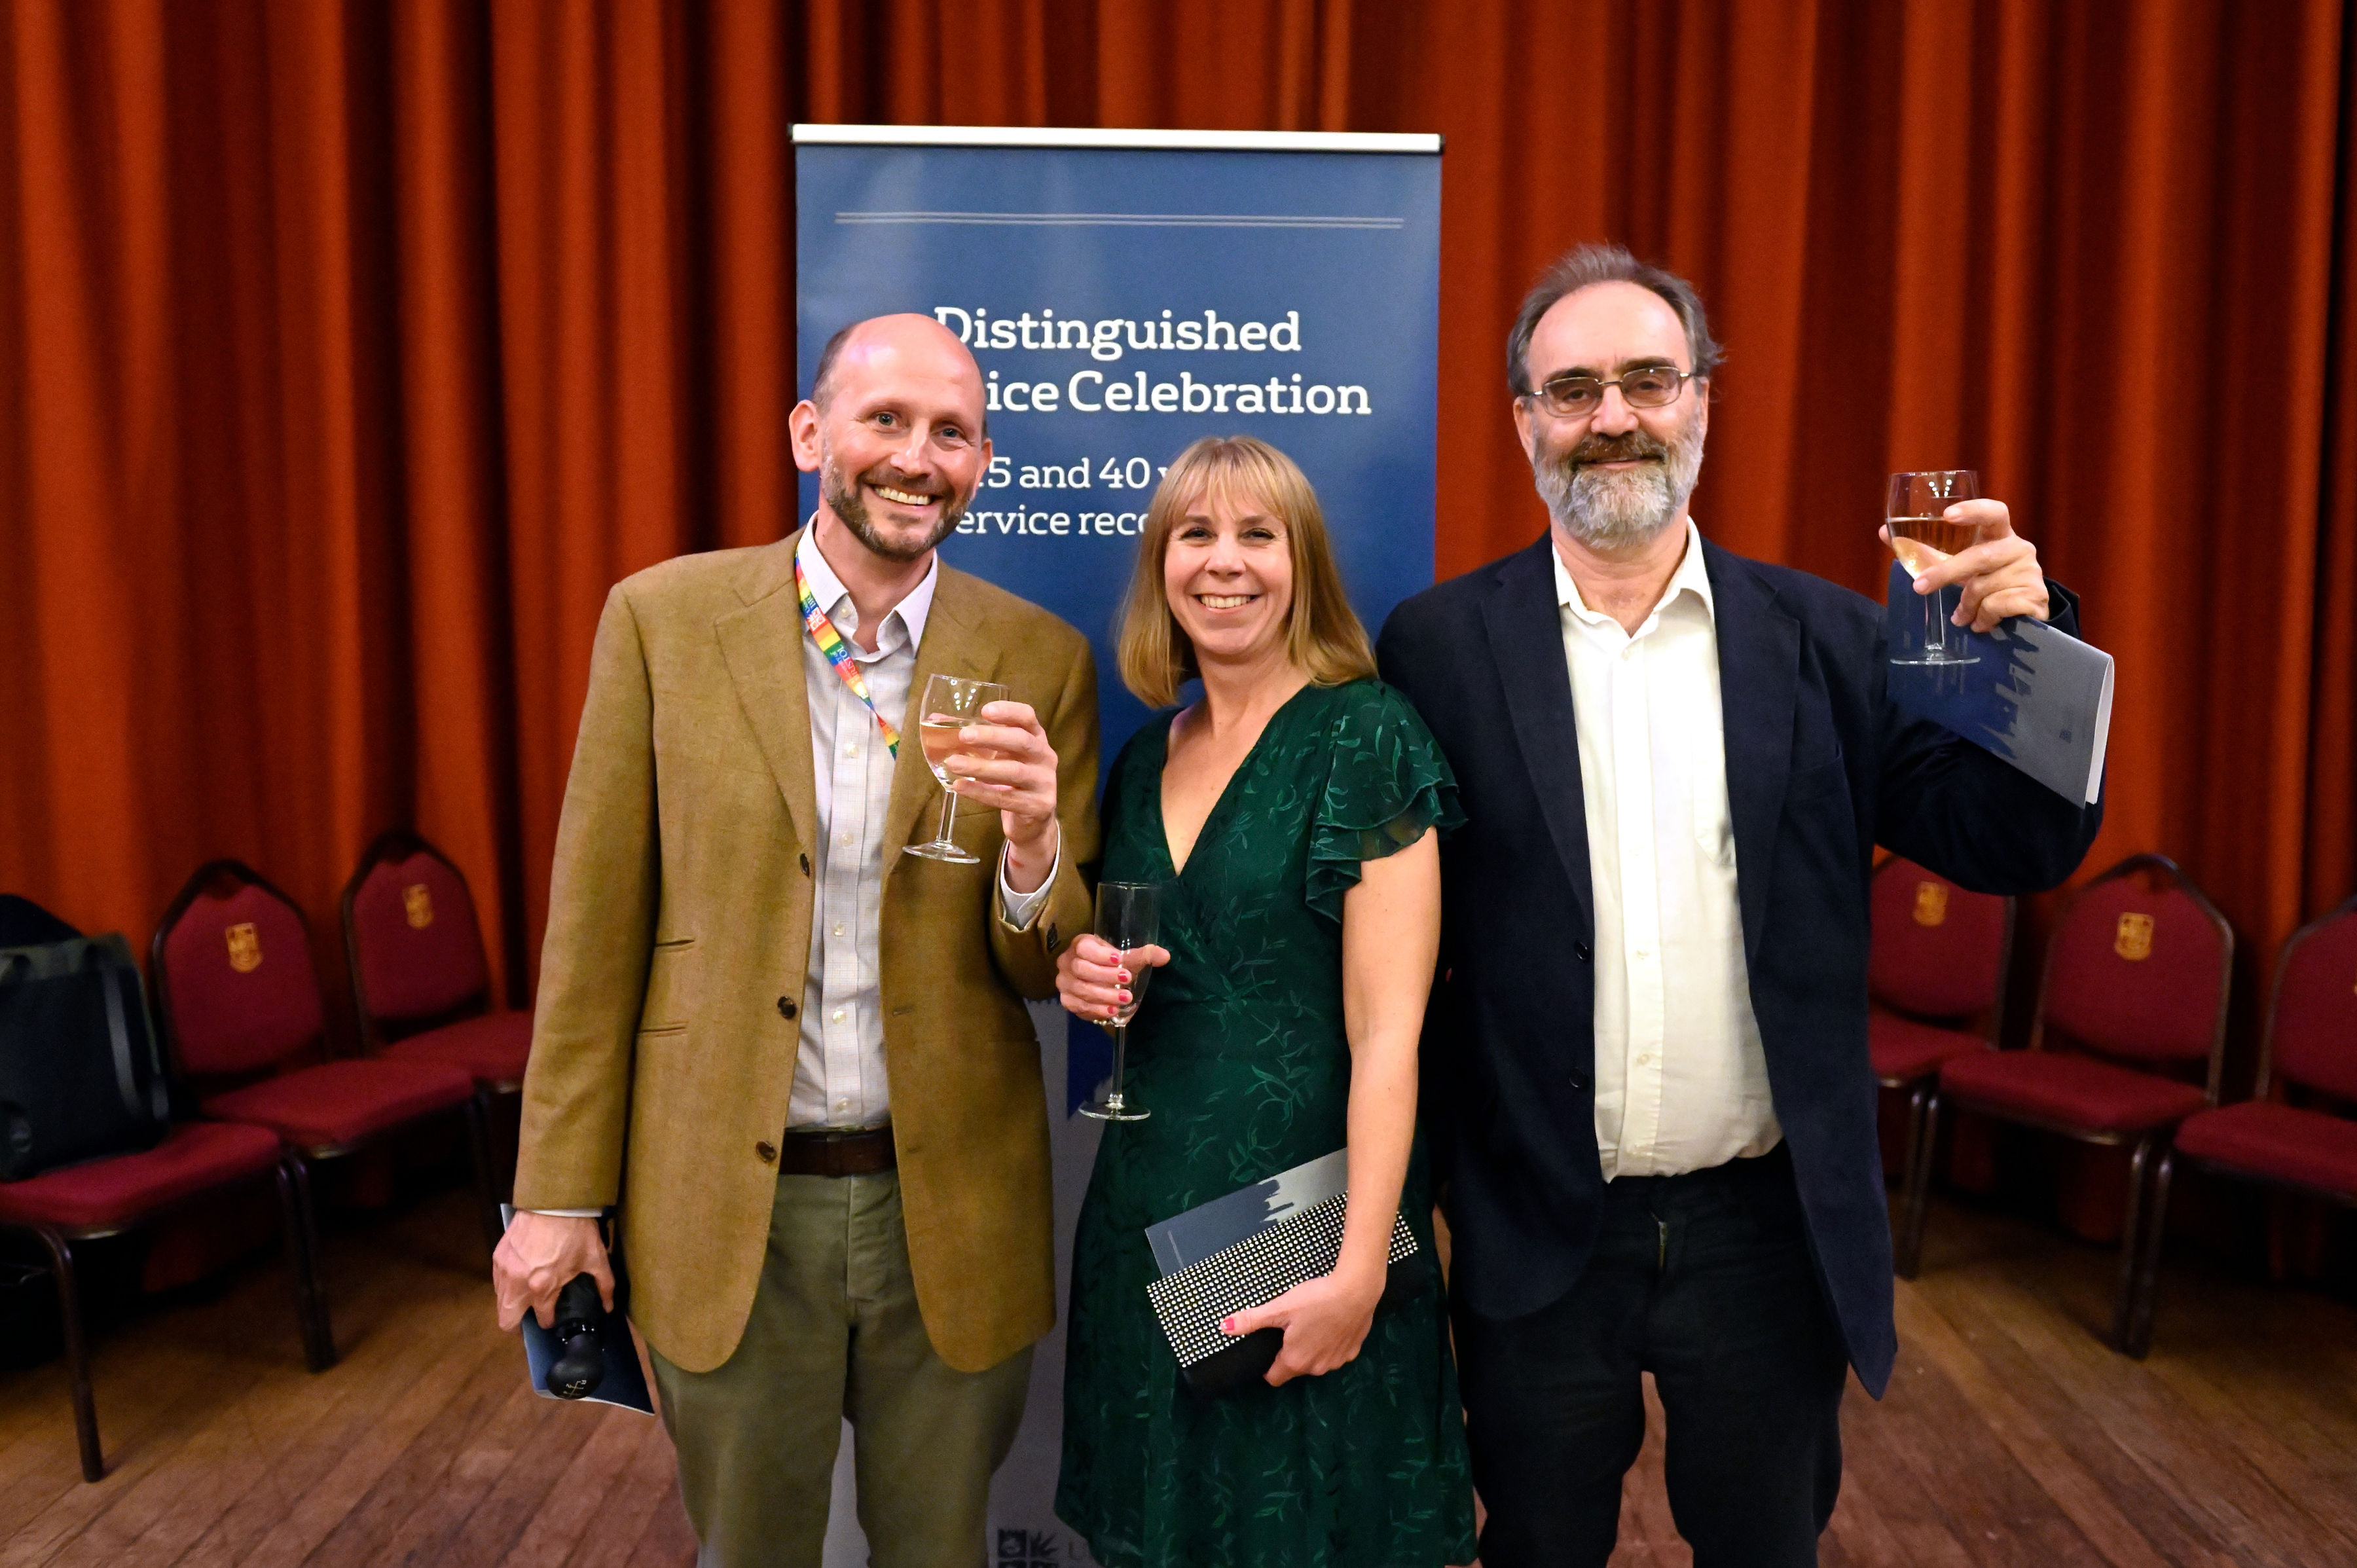 Professor Iain Gilchrist and Professor Jeff Bowers celebrating at the event with Charlotte Powell